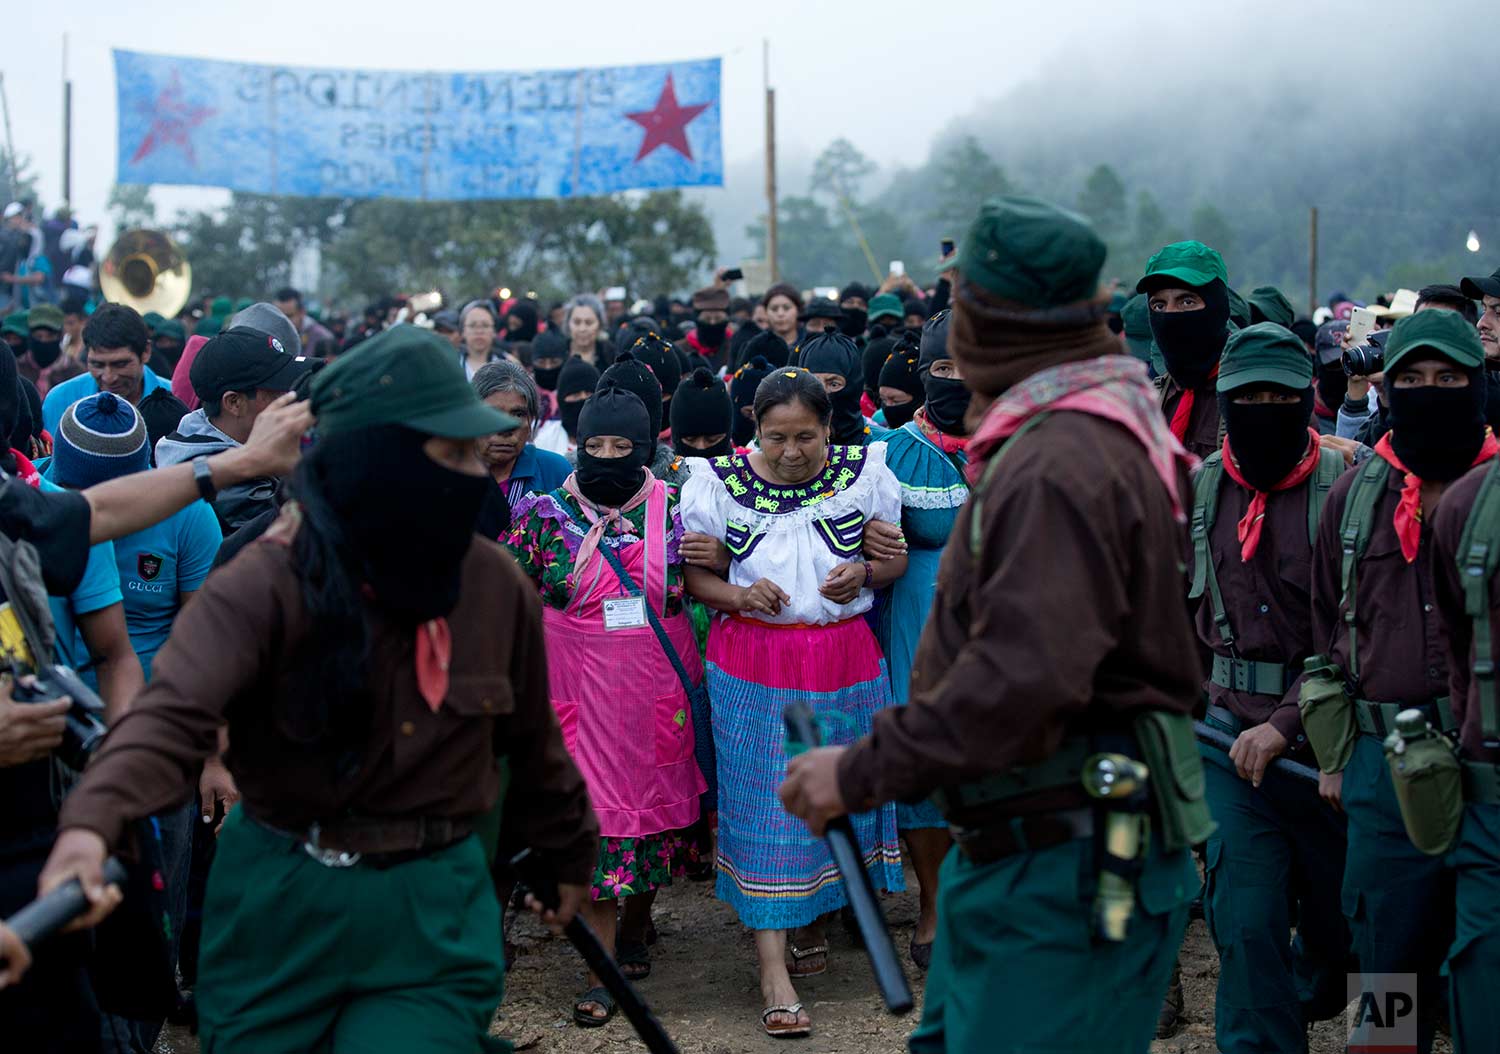  In this Sunday, Oct. 15, 2017 photo, presidential candidate for the National Indigenous Congress, Maria de Jesus Patricio, is escorted by Zapatistas at her campaign rally in the Zapatista stronghold of Morelia, in the southern state of Chiapas, Mexico. (AP Photo/Eduardo Verdugo) 